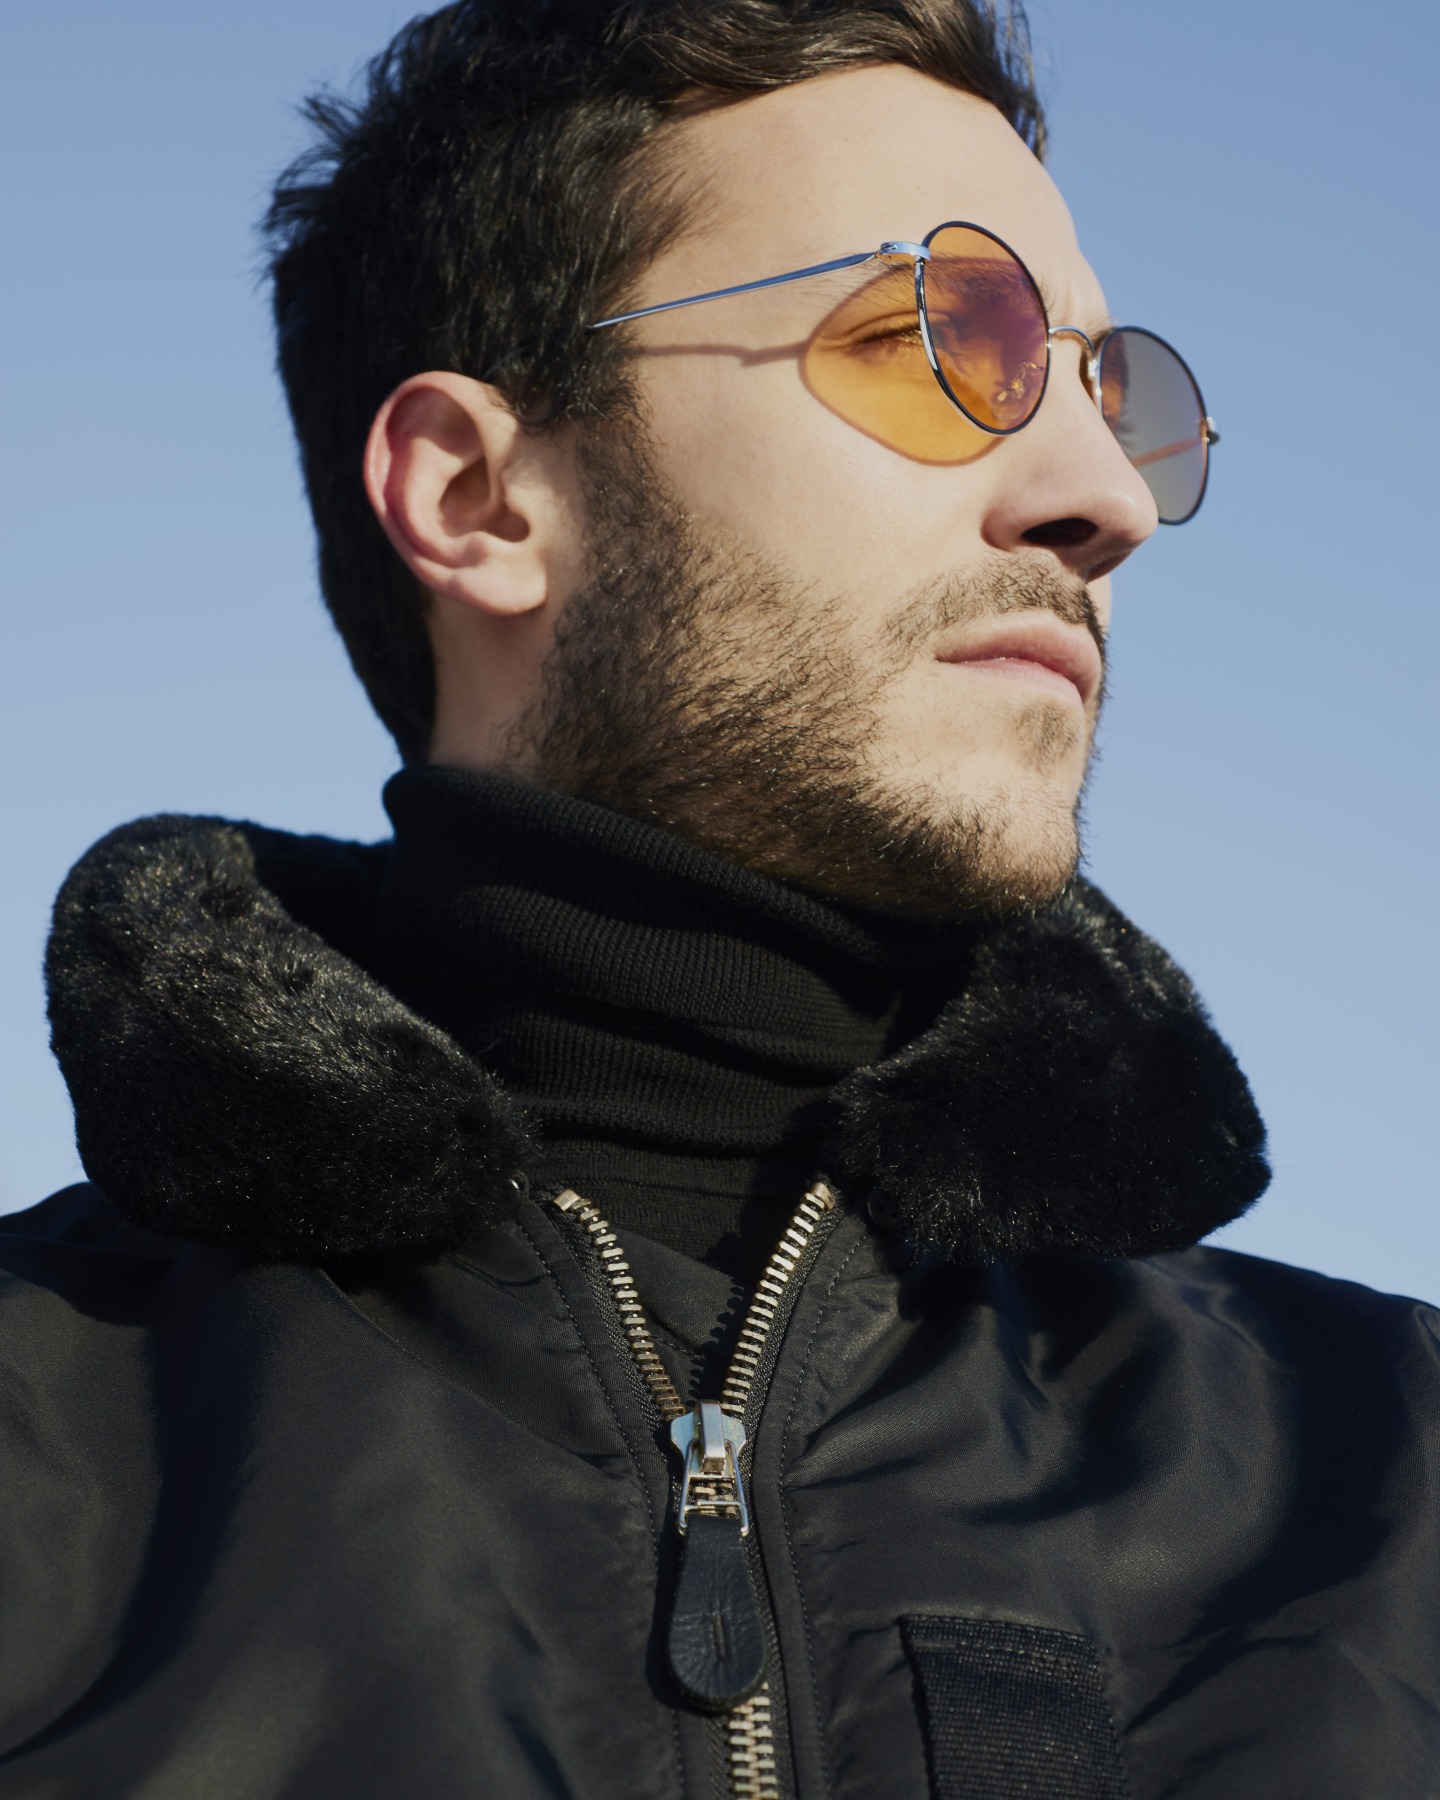 Meet Brodinski, The French Producer Finding New Life In Atlanta Rap